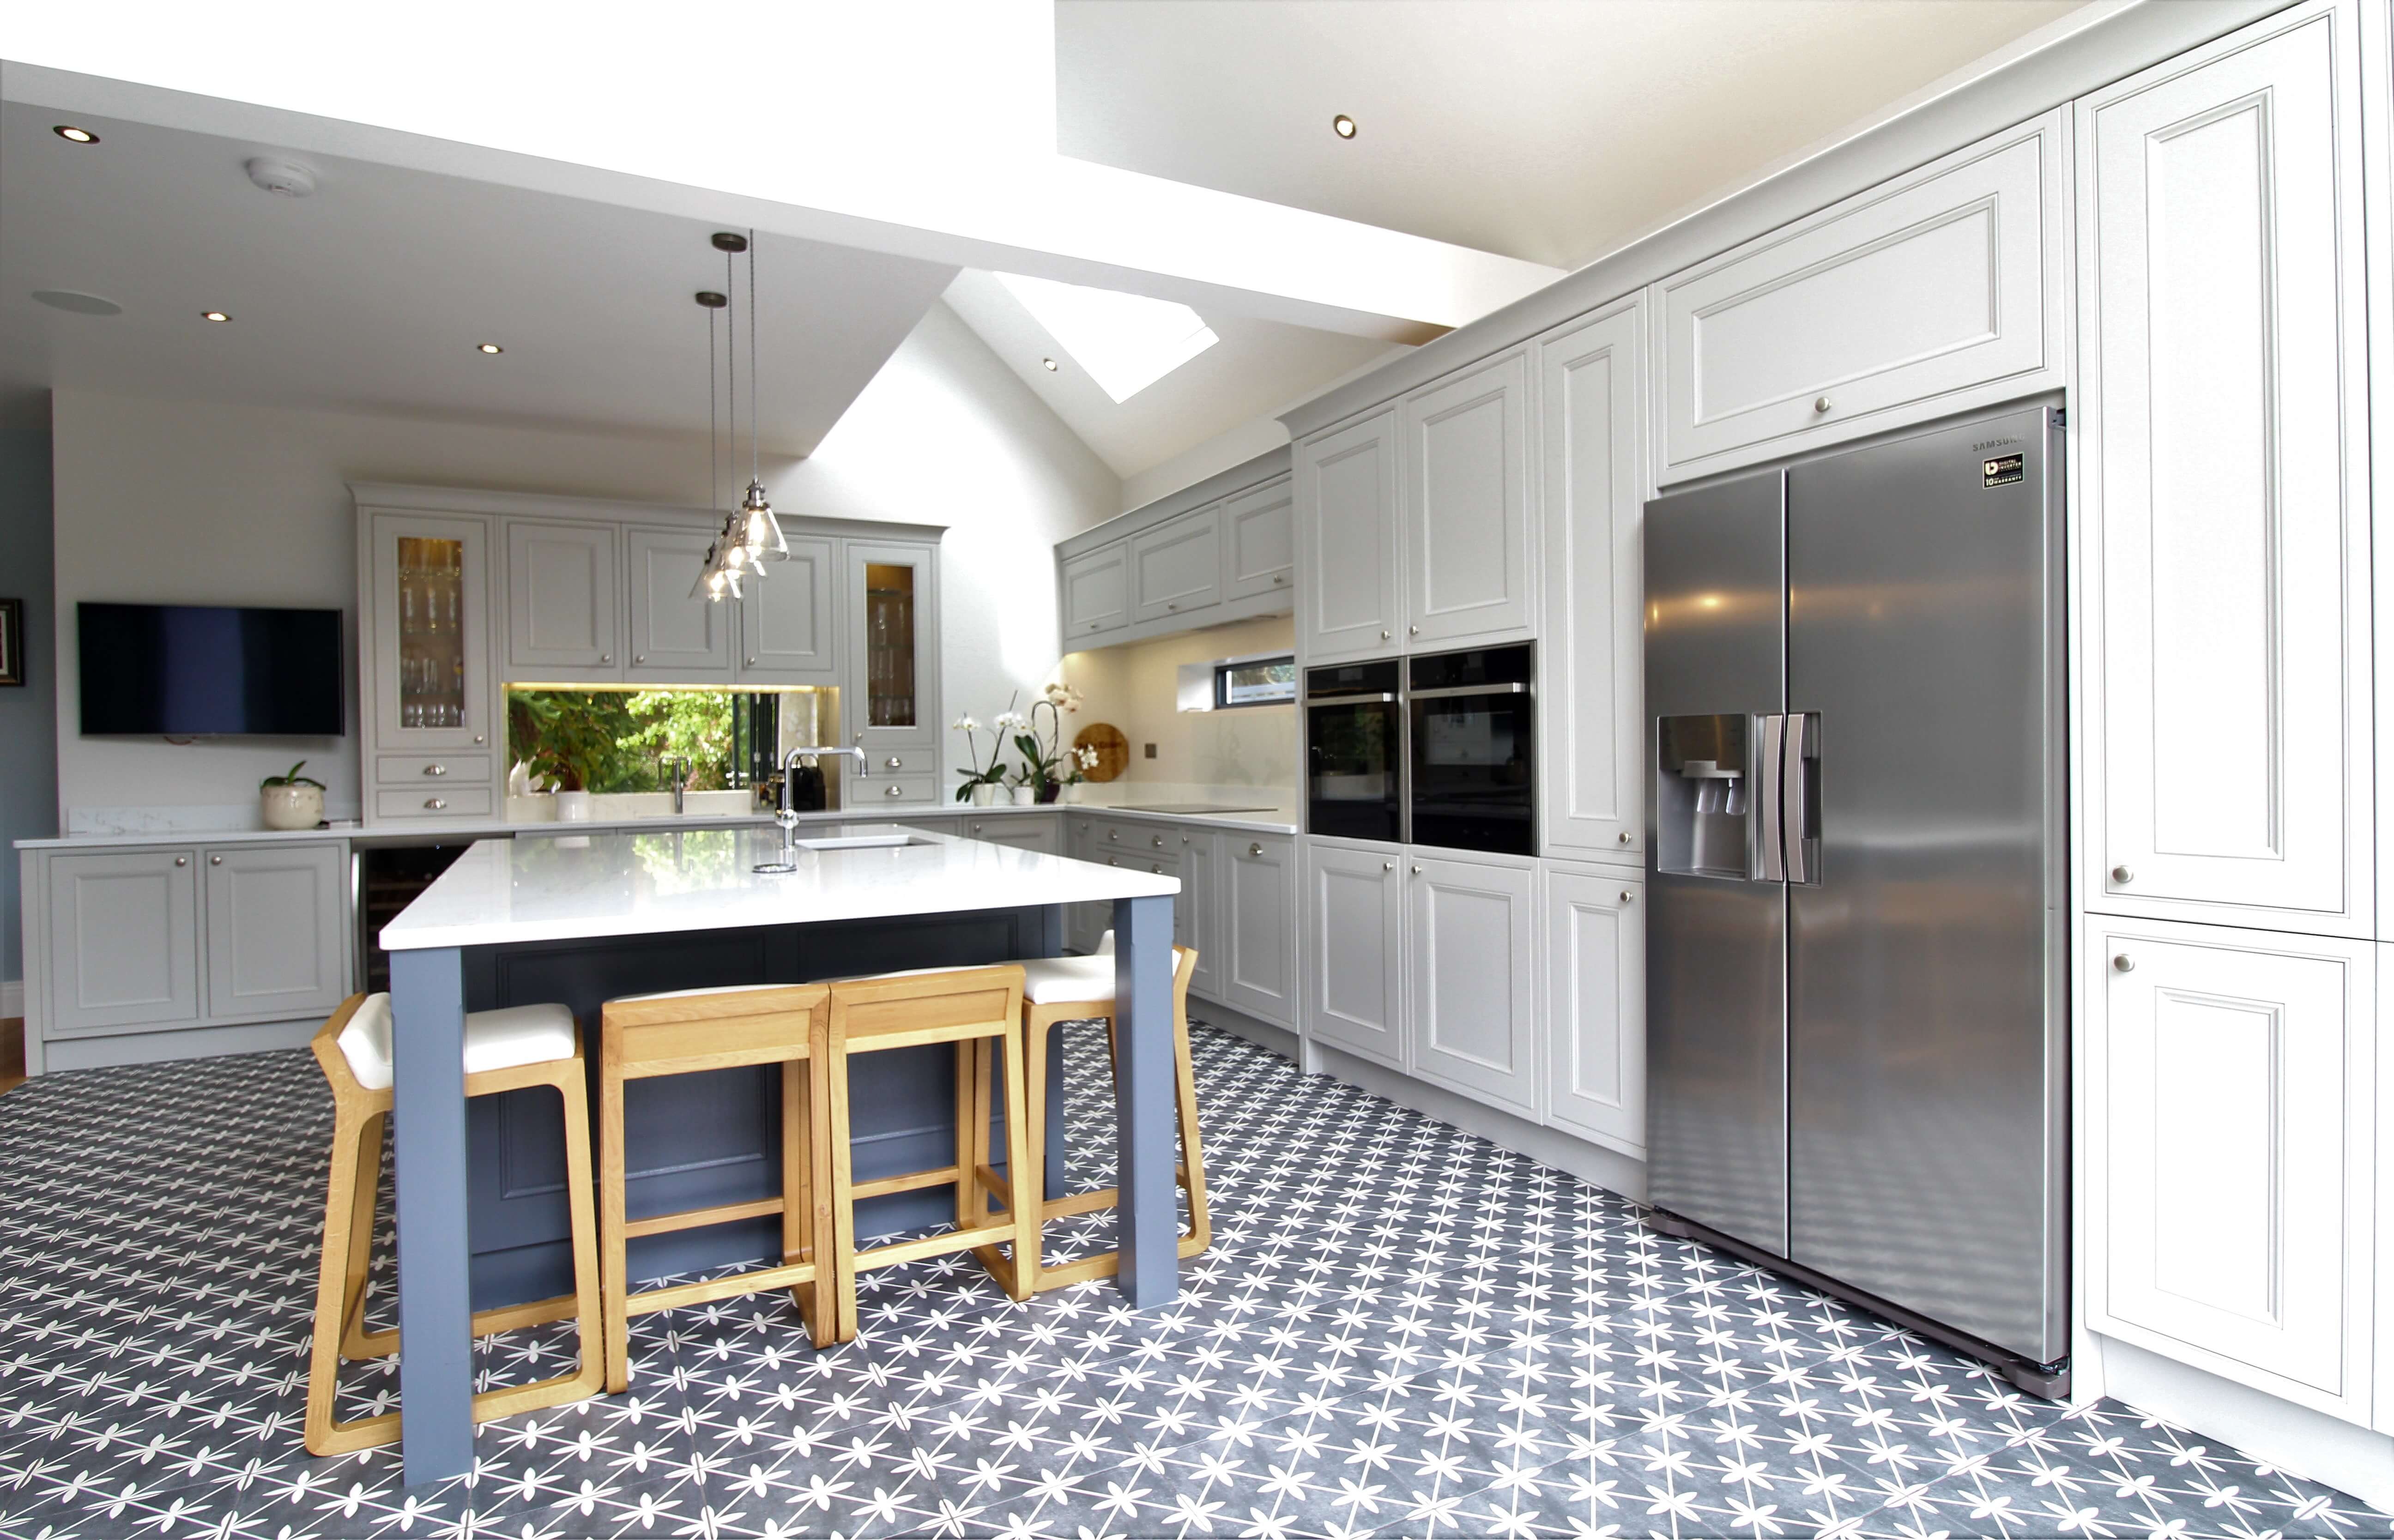 Inframe painted shaker kitchen in Light Grey and Slate, Noble Kitchens